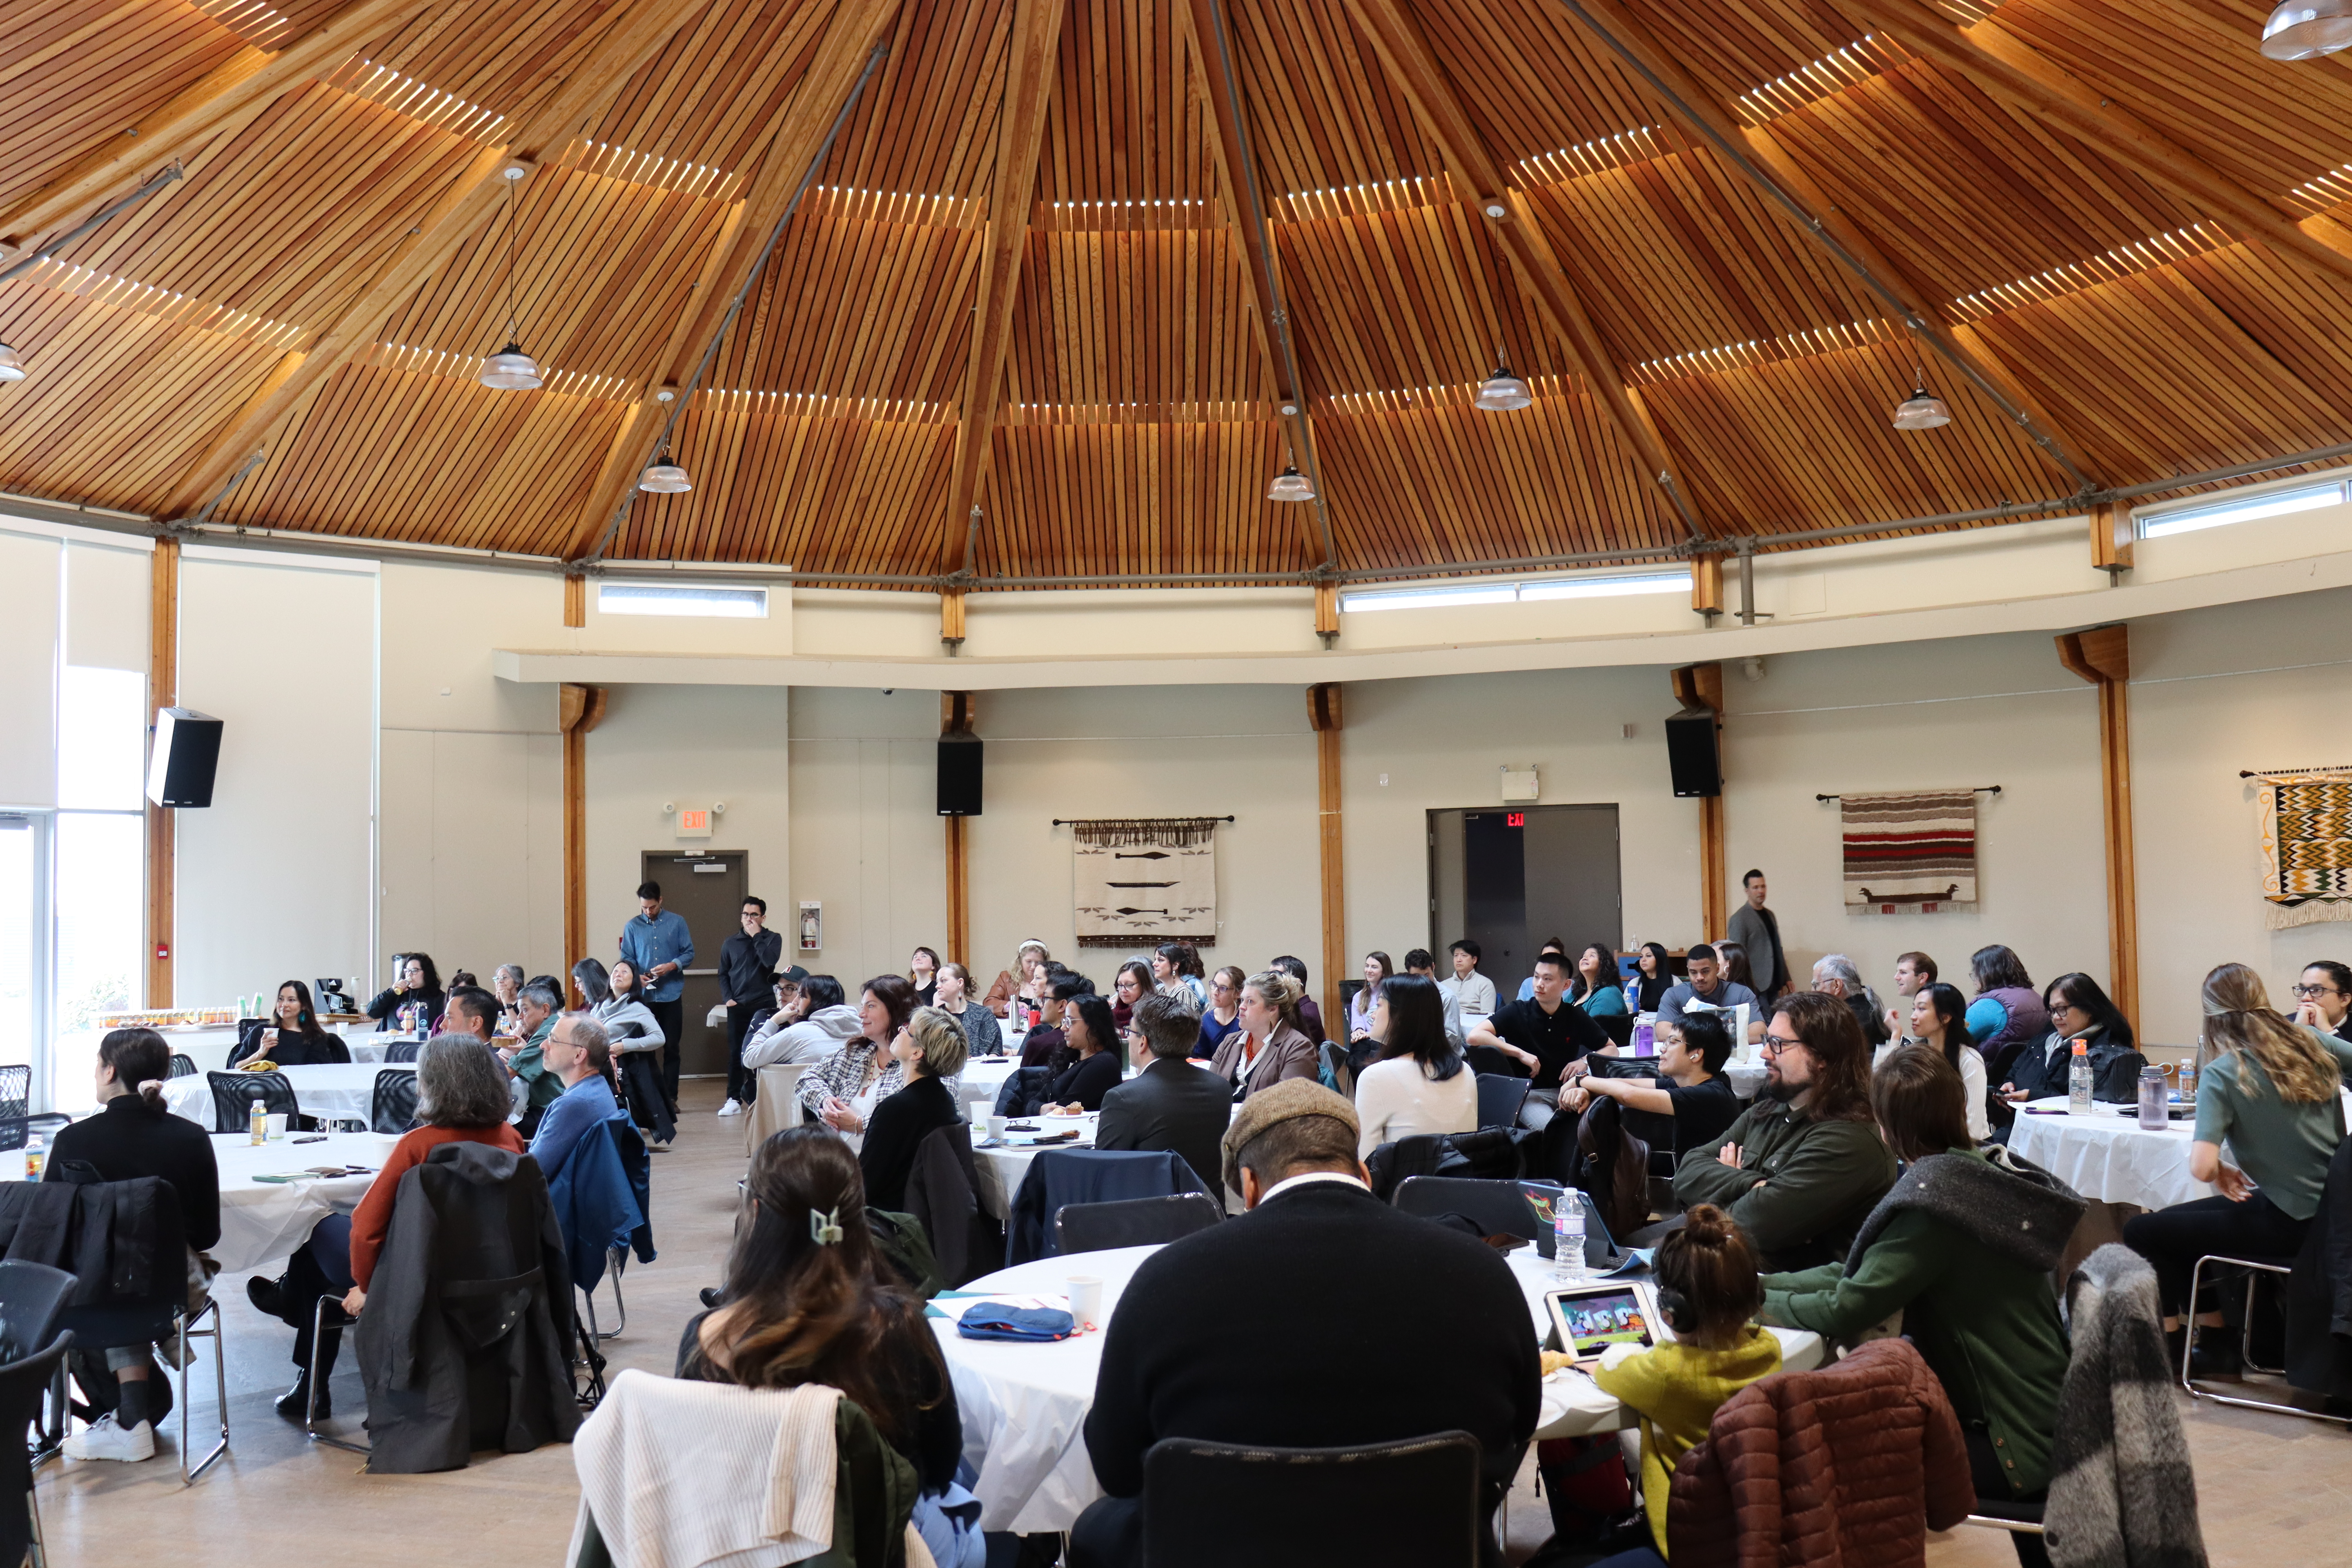 Musqueam Cultural Centre, its guests gathered